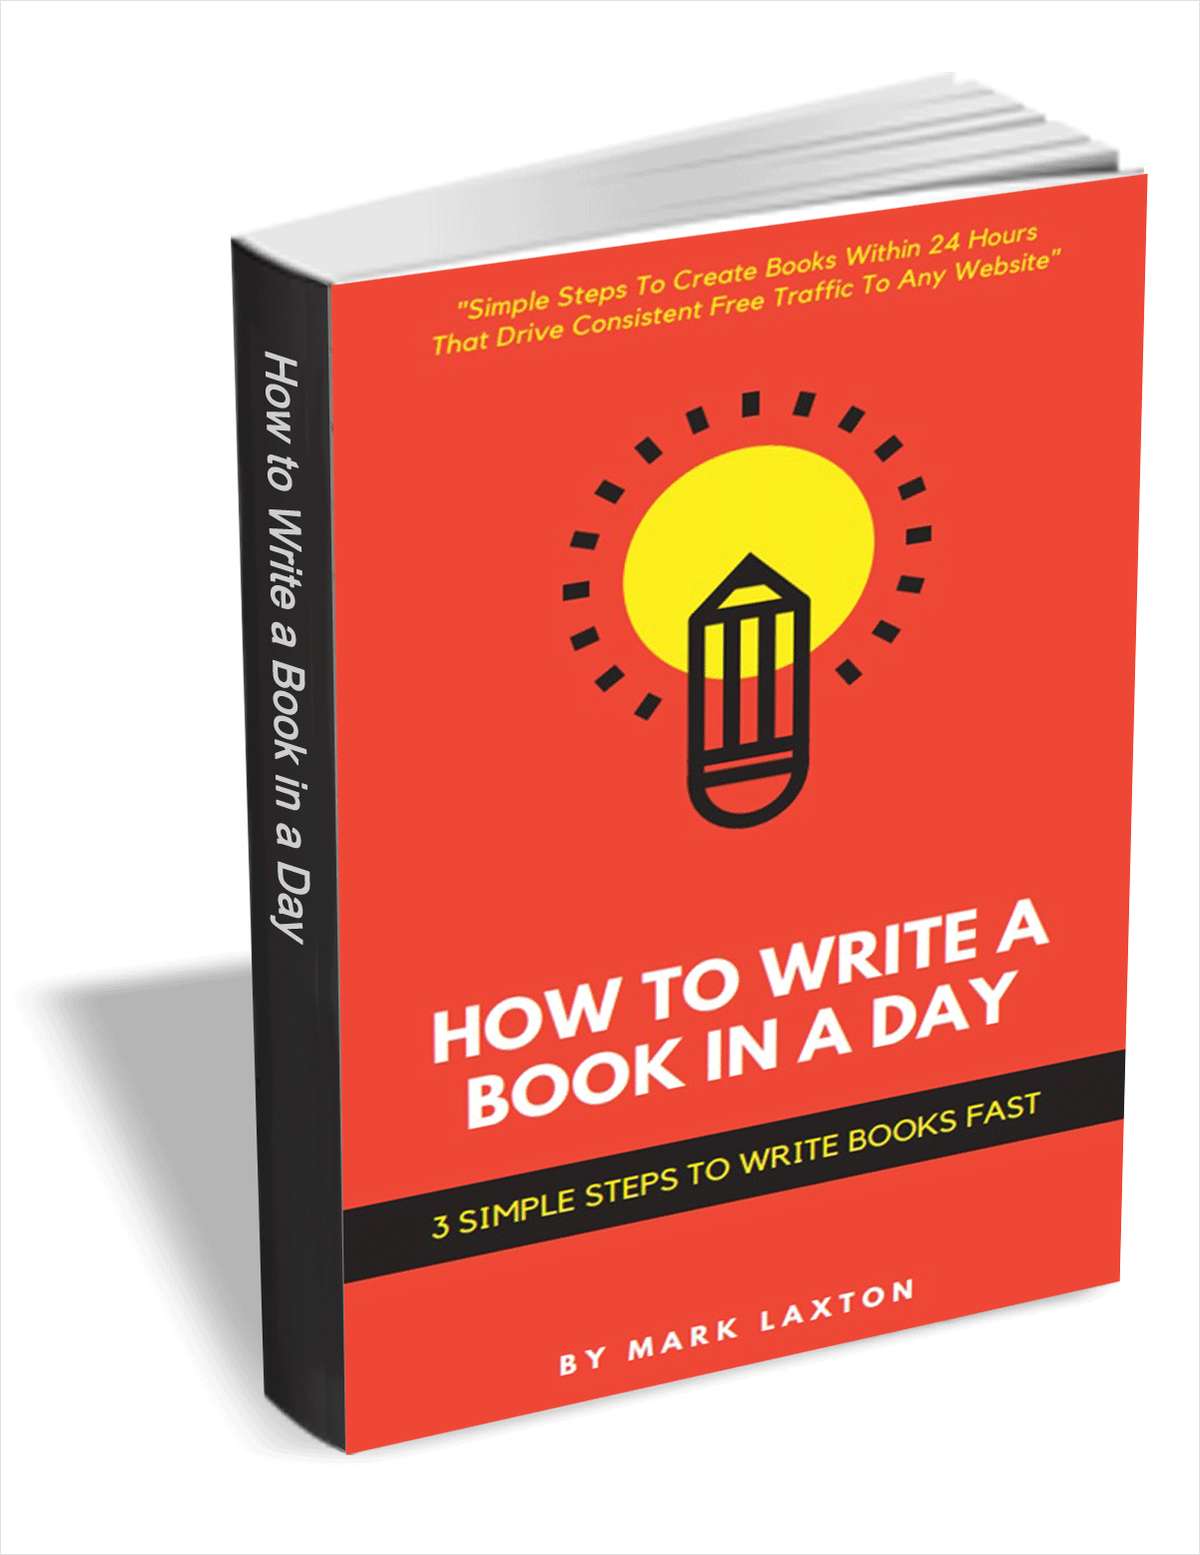 How To Write A Book In A Day 3 Simple Steps To Write Books Fast Free Mark Laxton EGuide